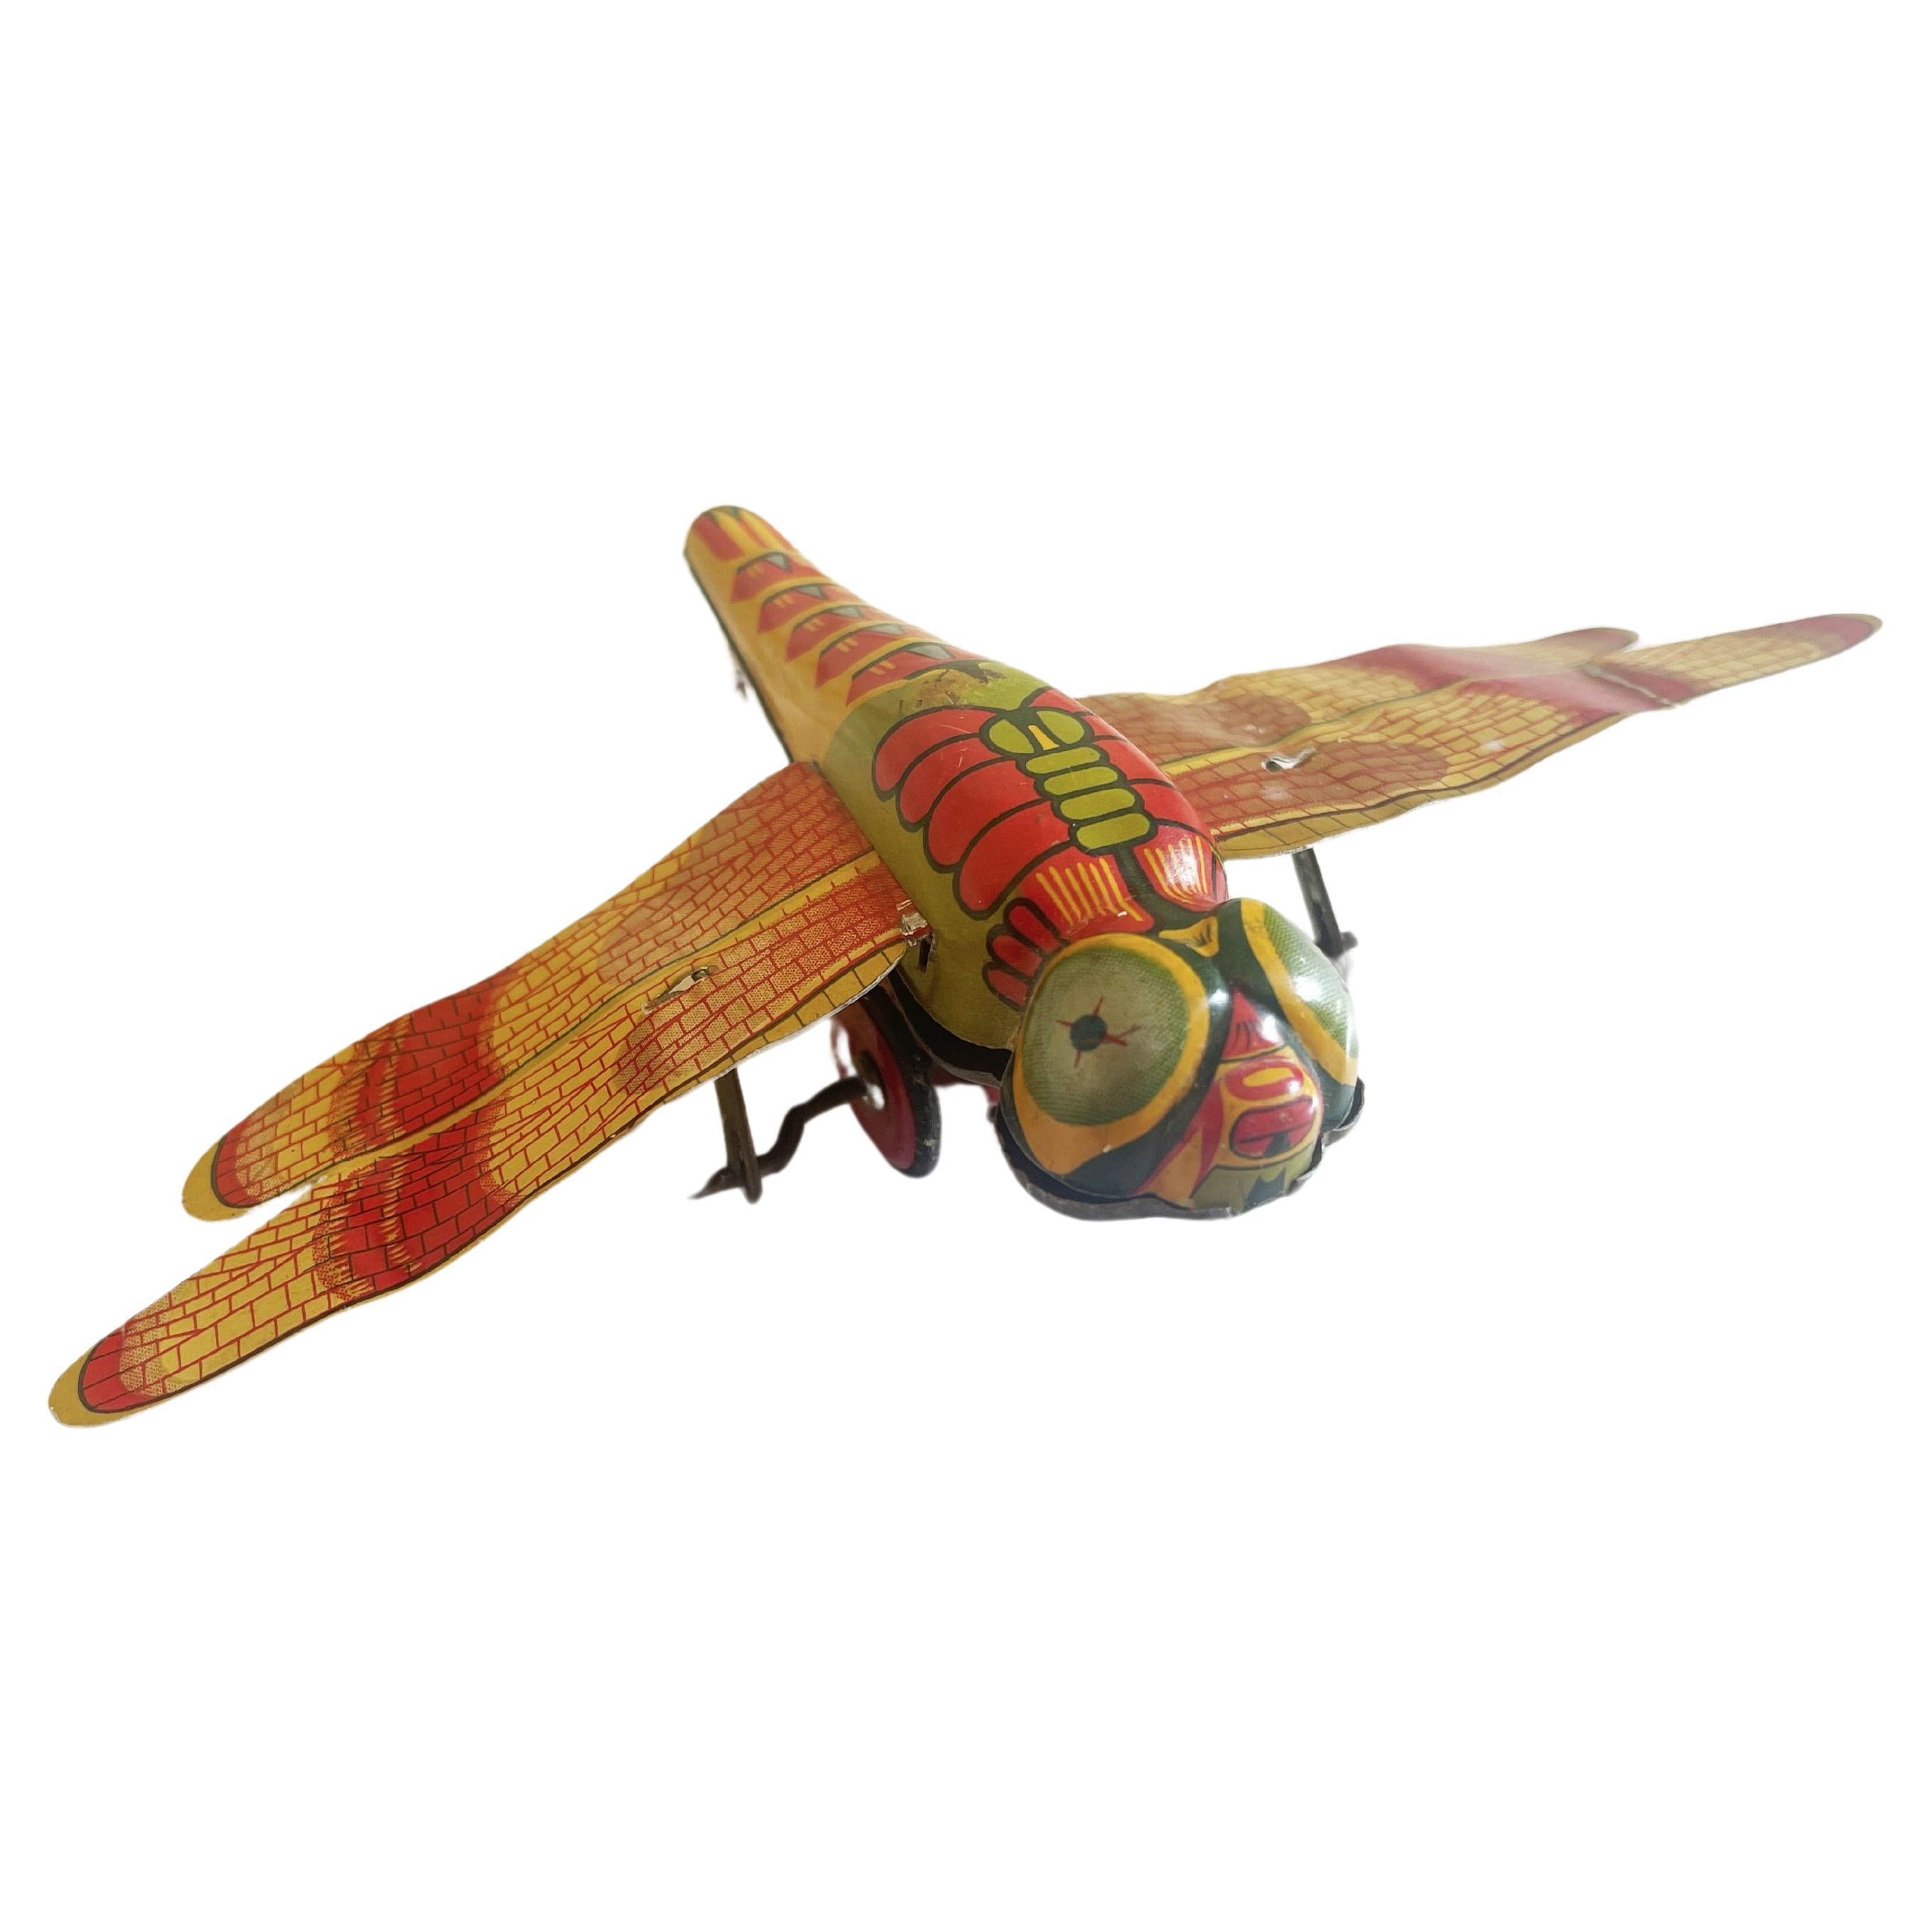 Japanese tin mechanical tin toy from the 1940s to 1950's in the shape of a dragonfly, which features flapping wings, once the 'beast' ist put in motion via it's wheels.
Beautiful litho printed in juicy colours of orange & red.
There is a lighter and